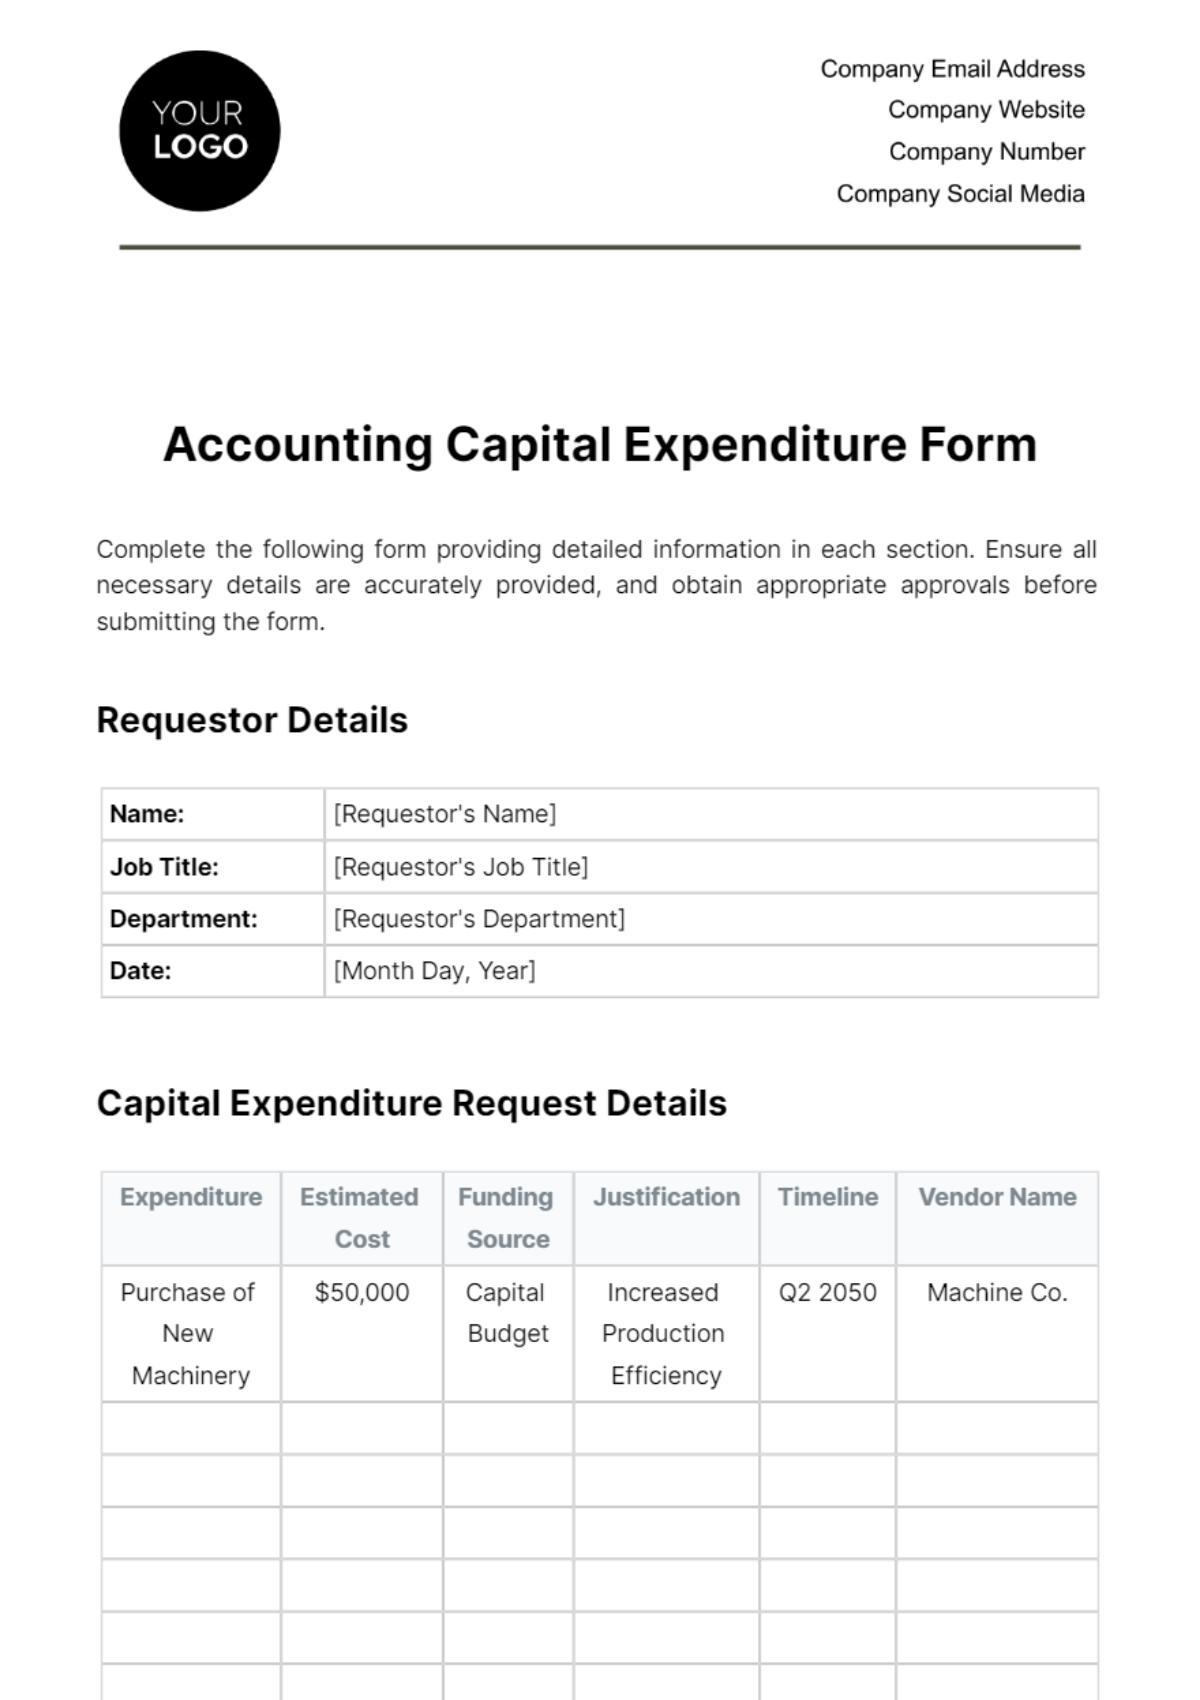 Accounting Capital Expenditure Form Template